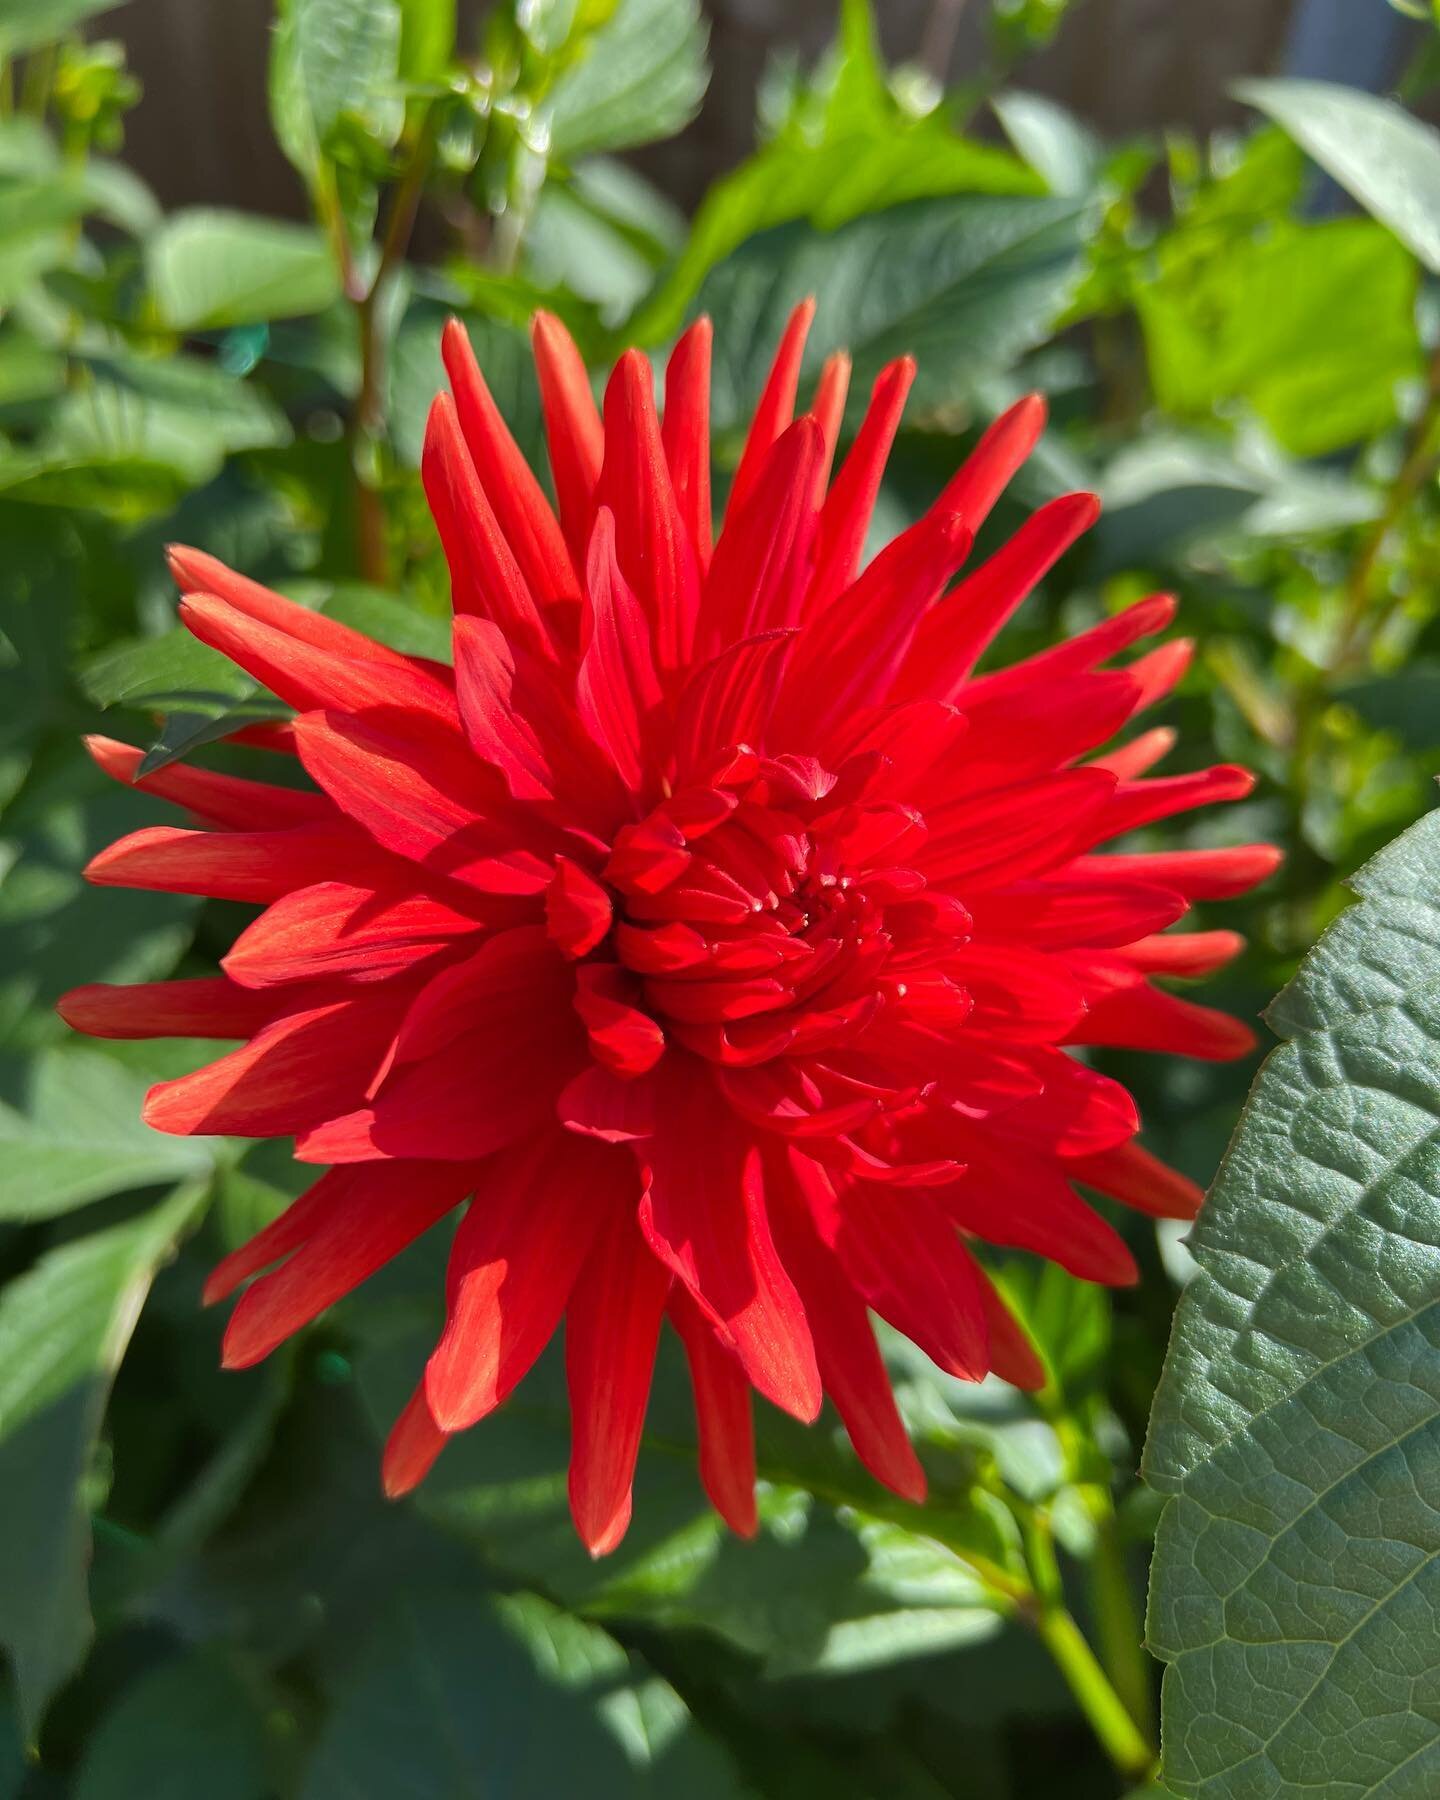 If only they lasted until Christmas&hellip; 🎄🎁

Dahlia &lsquo;Berger&rsquo;s Record&rsquo; looking beautiful - the most perfect true red. 

#dahliagrower #dahliasofinstagram #reddahlia #dahliabergersrecord #dailydahlia #dahlialove #grownnotflown #b